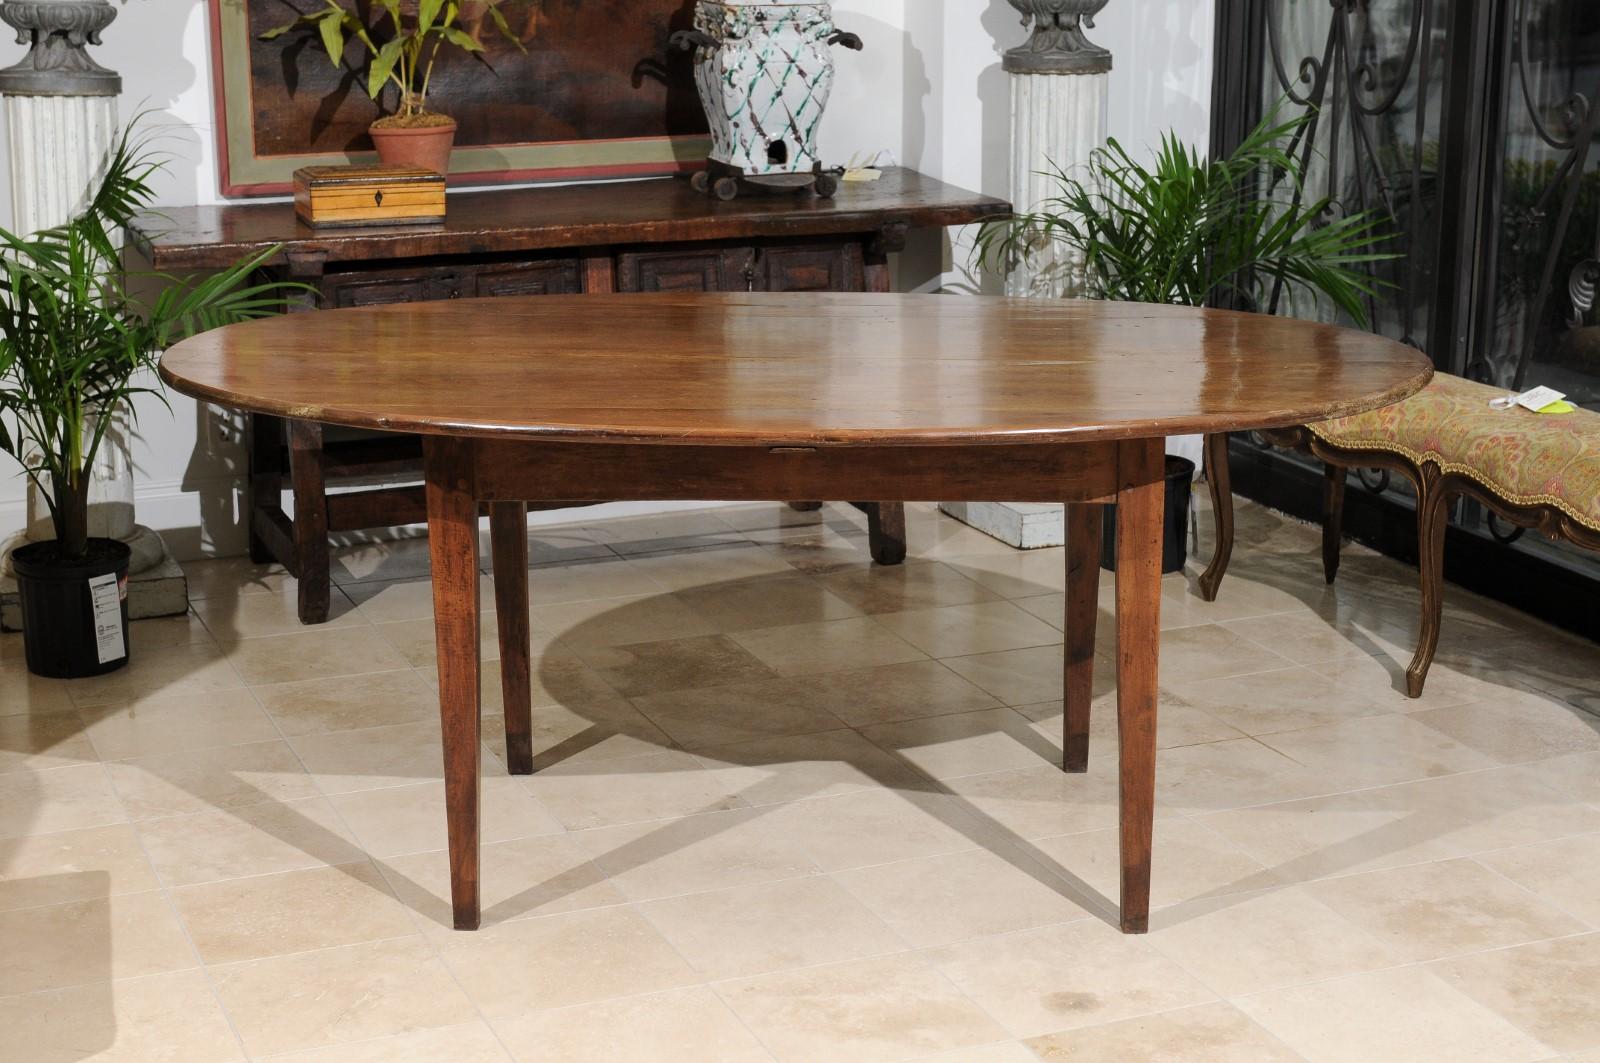  French Oval Farm Table with Tapered Legs 1